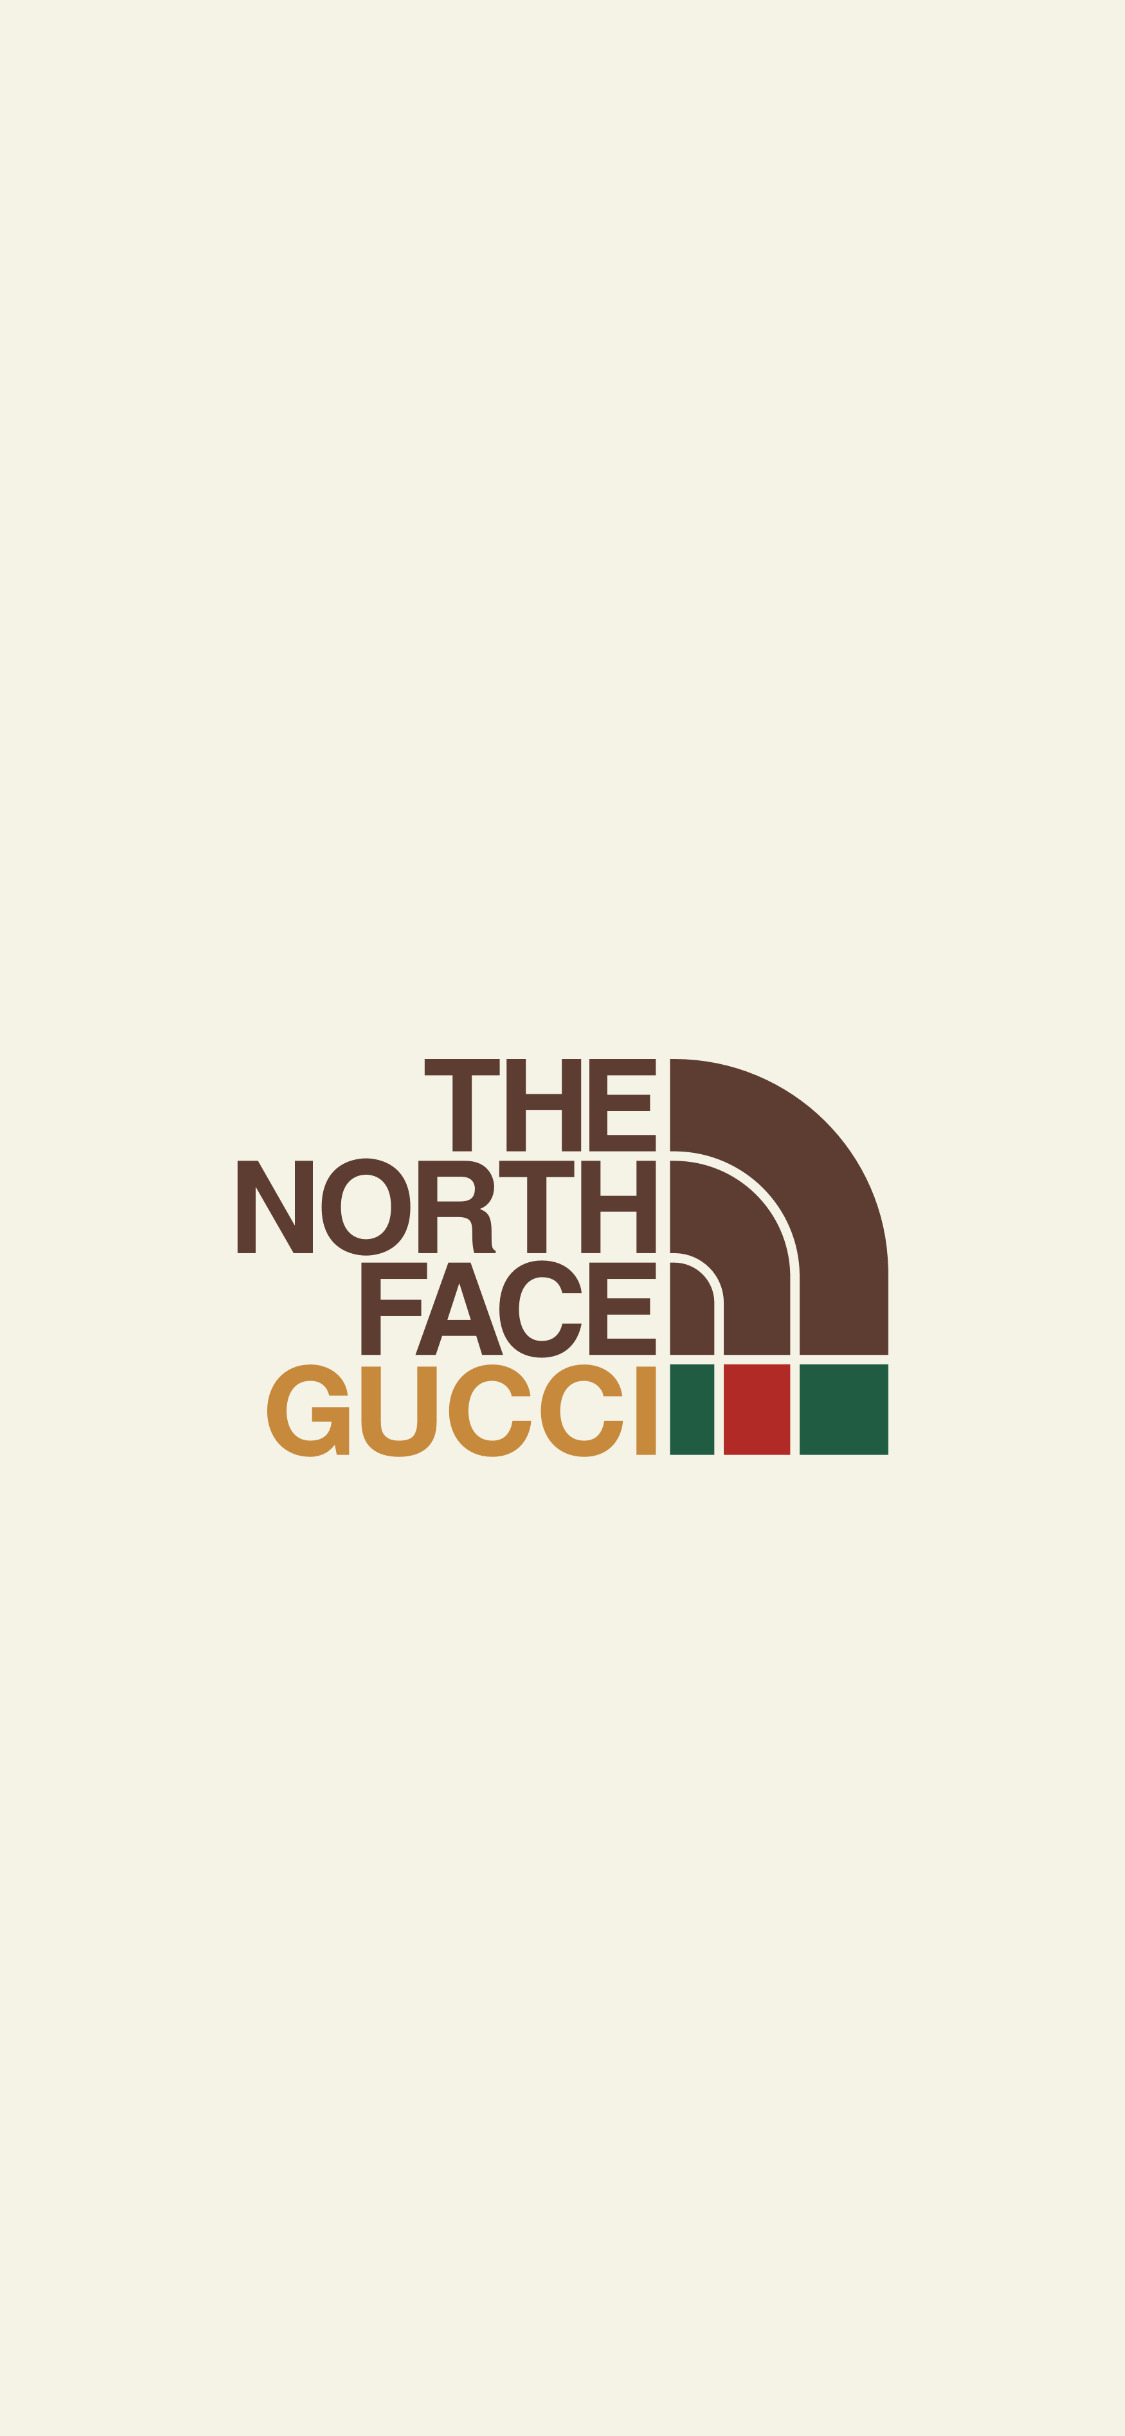 northgucci01 - THE NORTH FACE X GUCCIの無料高画質スマホ壁紙23枚 [iPhone＆Androidに対応]